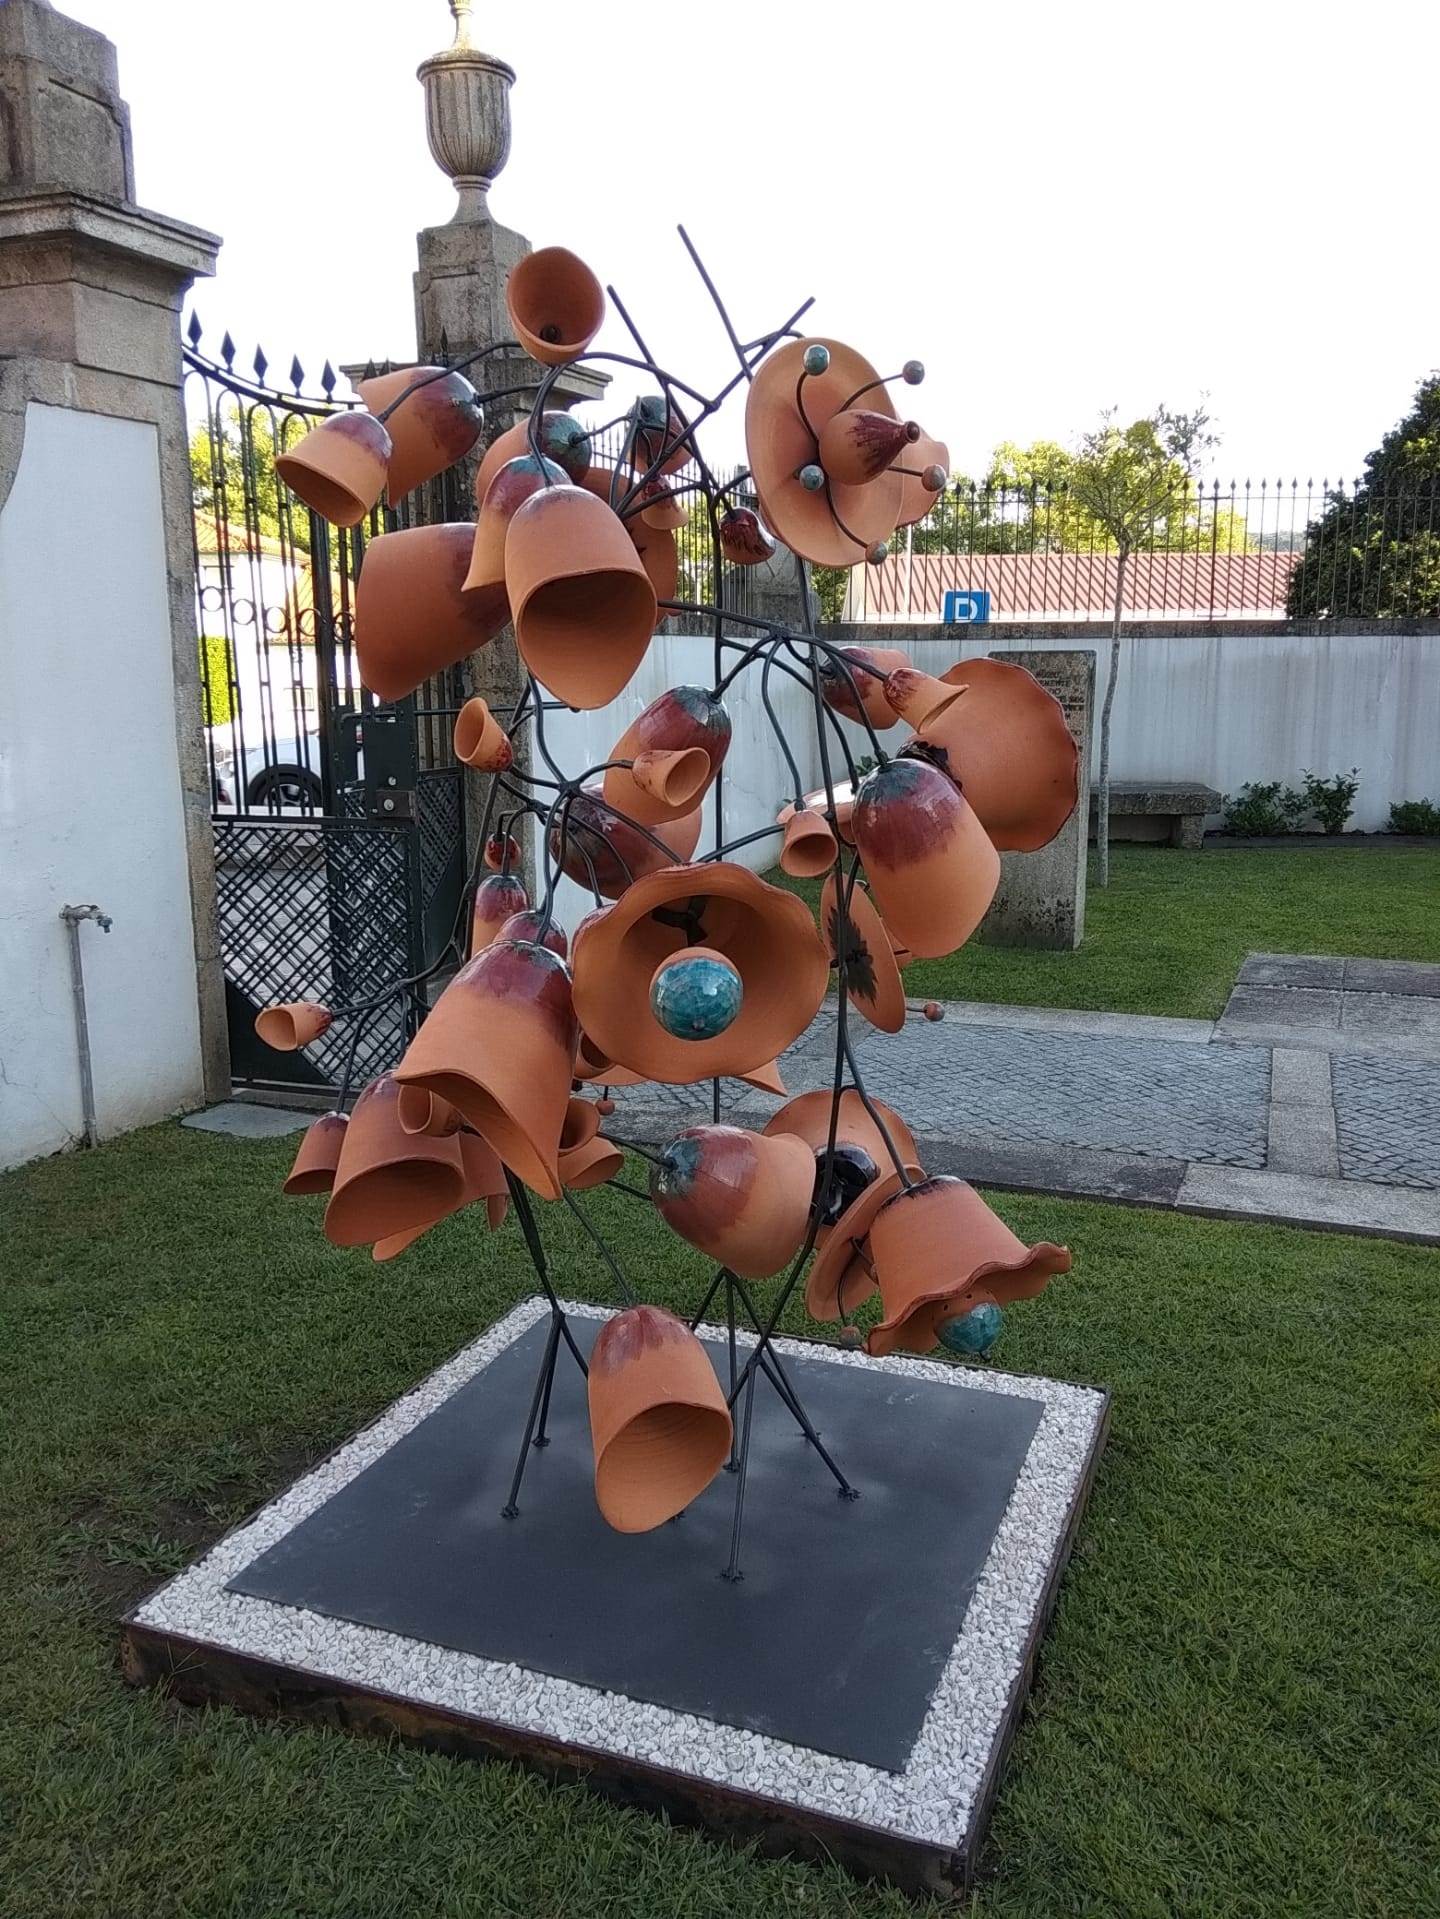 16.09.2020. Ana Almeida Pinto was in artistic residency in Barcelos where she produced a sculpture at the Pottery Museum, entitled BATTLING WITH FLOWERS, based on the artisanal techniques of pottery and ceramics and in collaboration with local artisans.